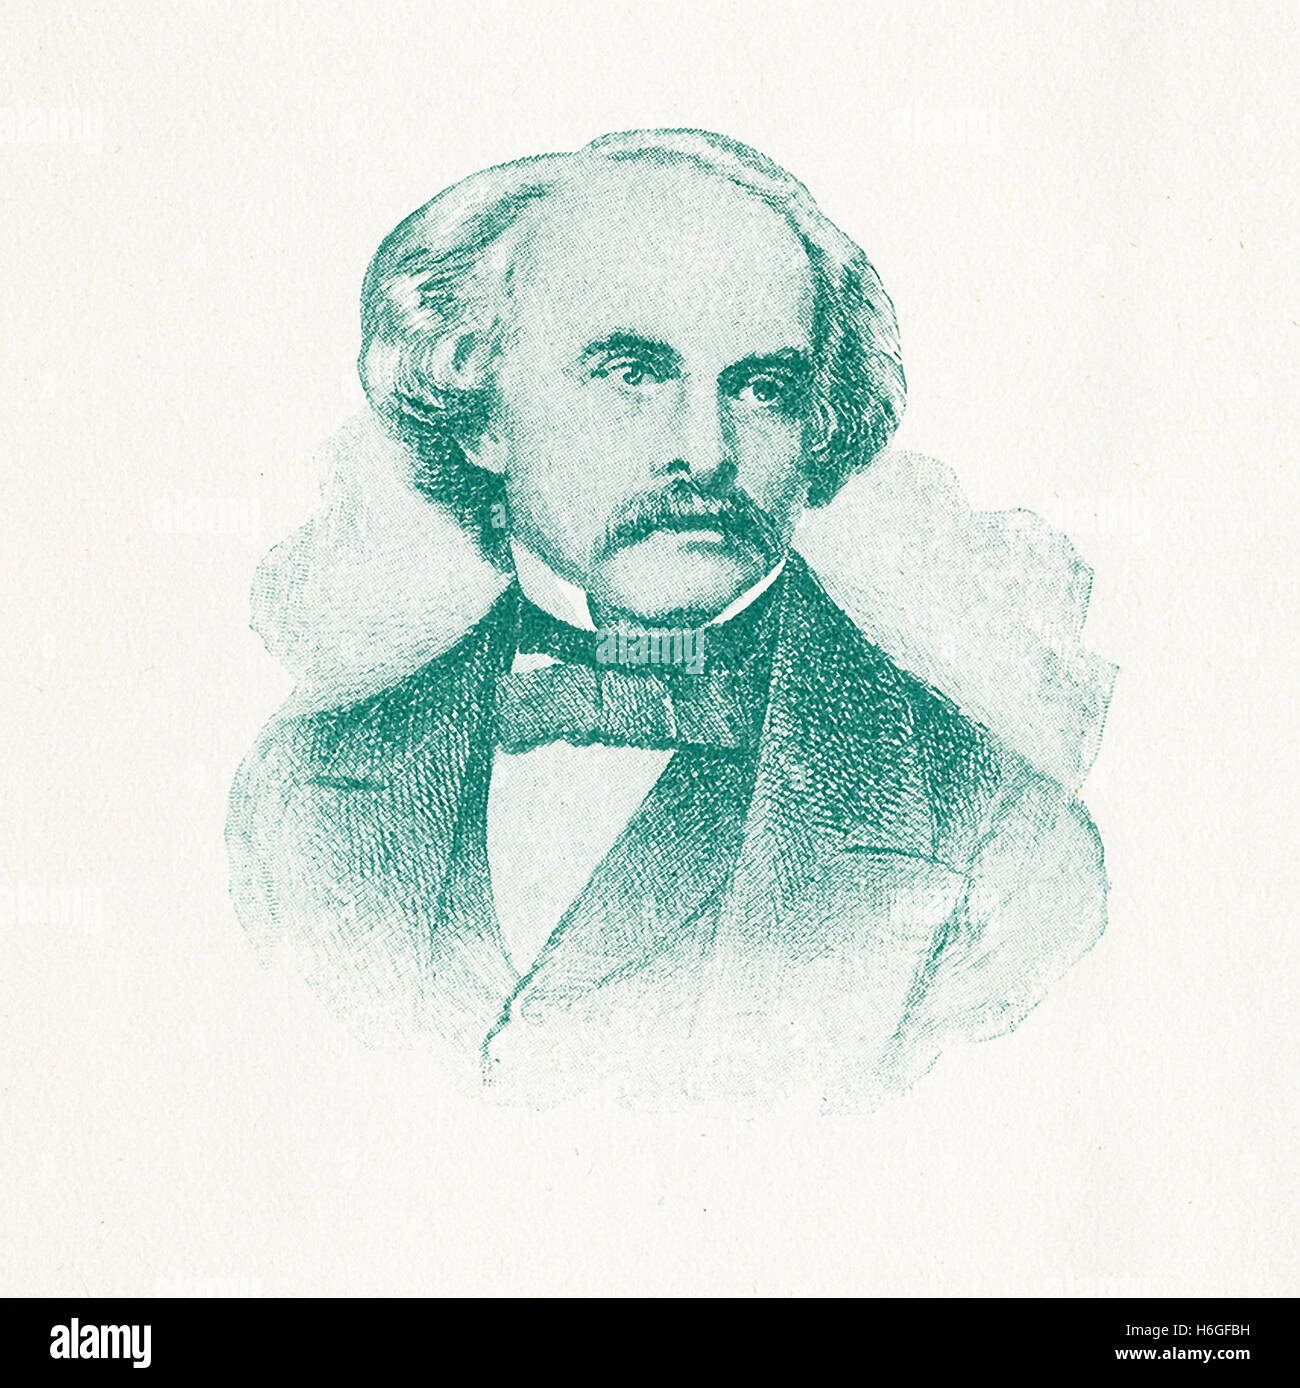 Nathaniel Hawthorne (1804-1864) was an American novelist and short-story writer. He wrote the novel 'Twice Told Tales' in 1837, with a second series published in 1842. Among his other works are The Scarlet Letter and The House of Seven Gables.' This illustration accompanied the novel 'Twice Told Tales' (this copy dating to c. 1895) by Hawthorne. Stock Photo